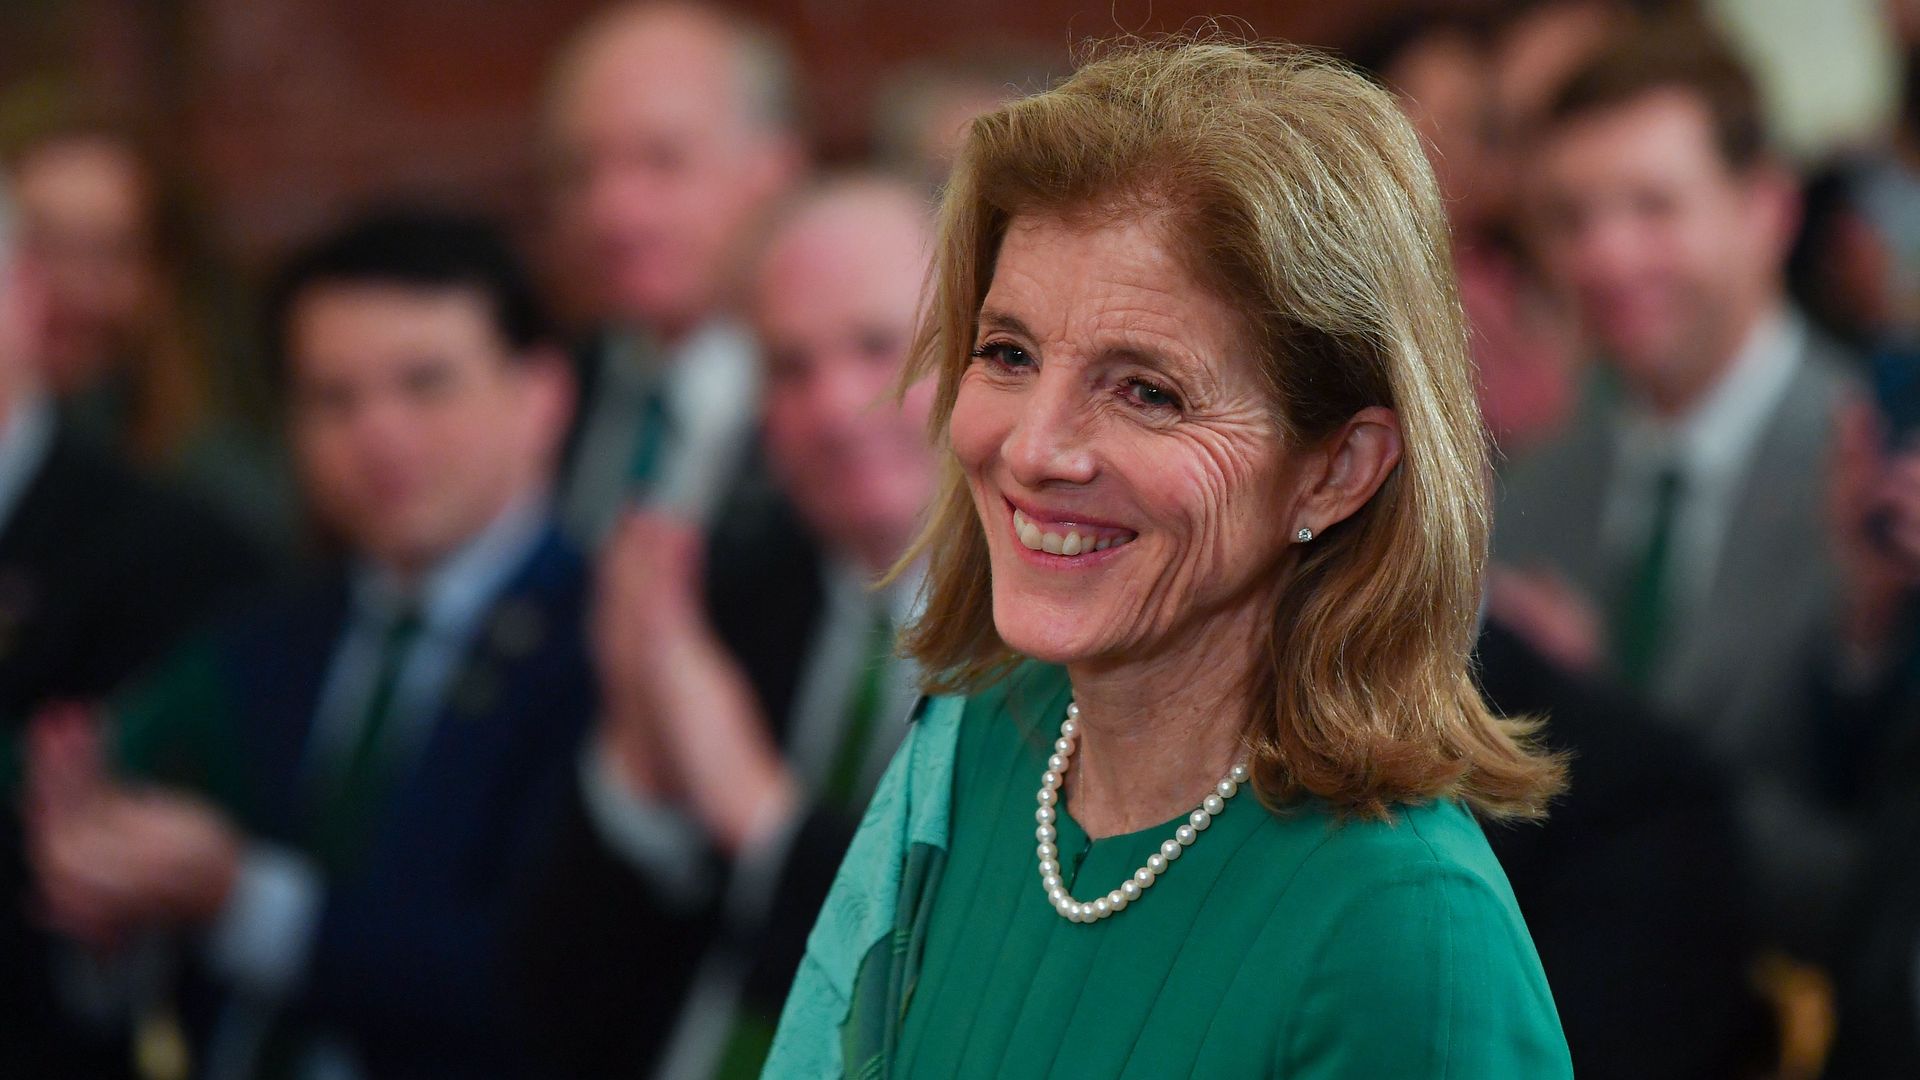 Caroline Kennedy is seen in the White House for a St. Patrick's Day celebration.